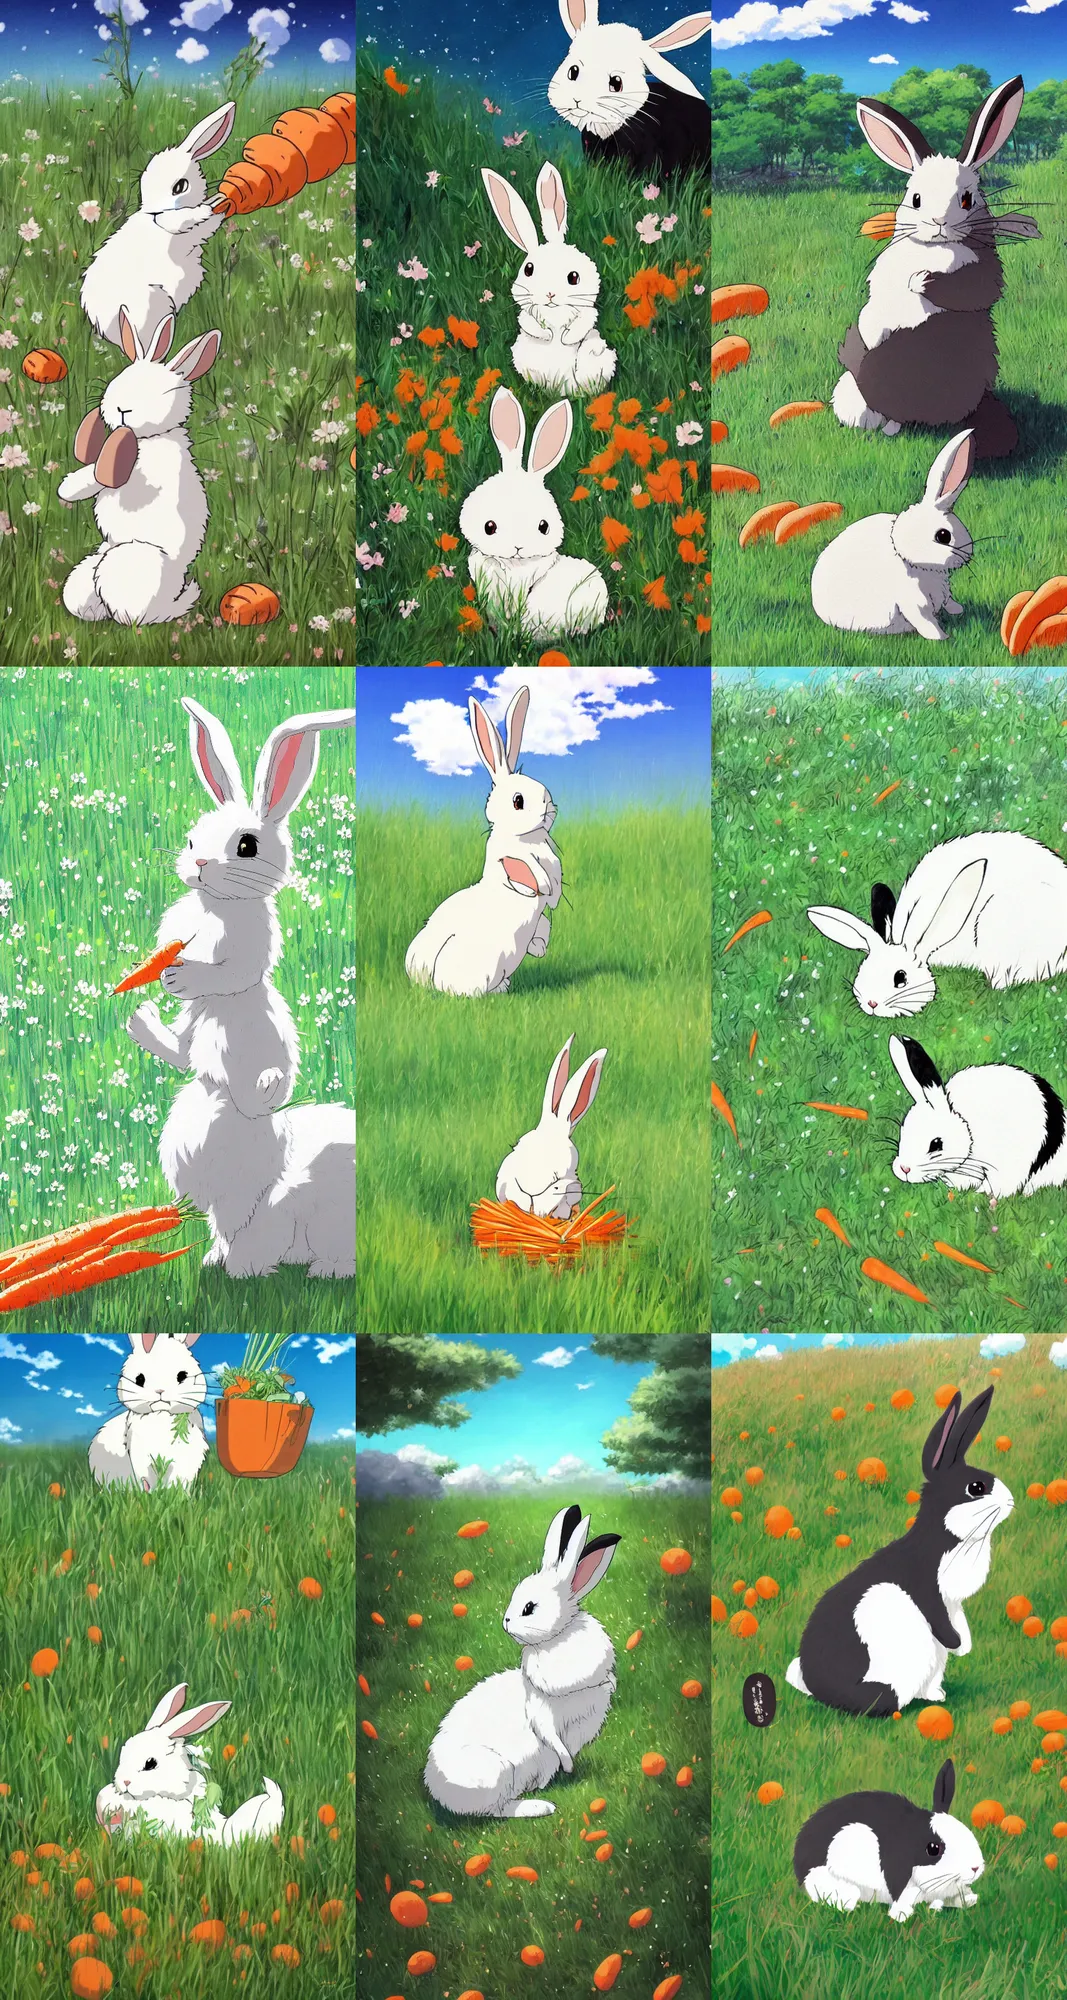 Prompt: beautiful painting from the anime film by studio ghibli, floppy eared bunny in a grassy field eating carrots, white with black spots, happy, trending on artstation